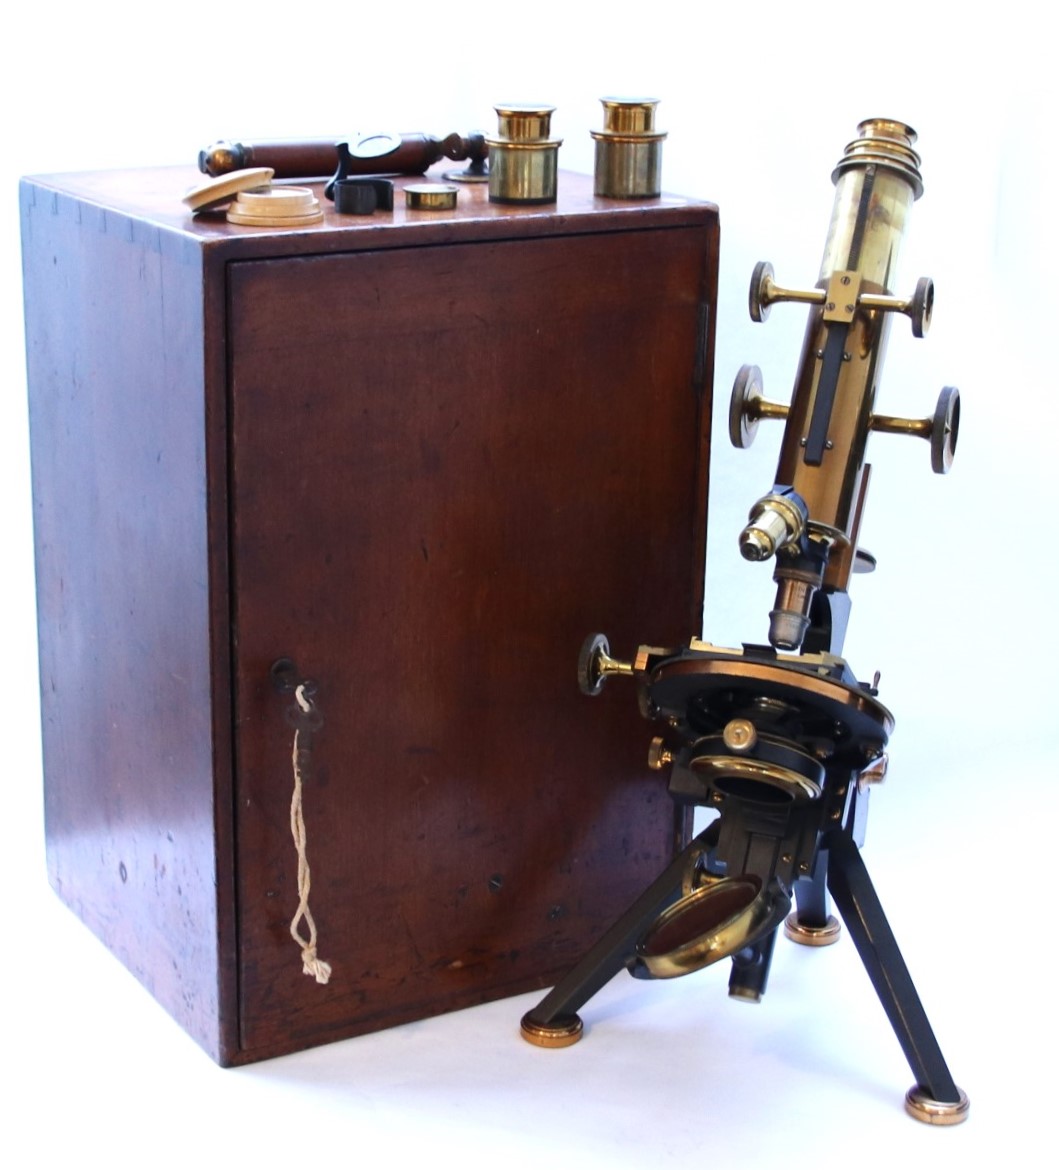 A “Henri Van Heurck” microscope coming from the Orville Golub collection